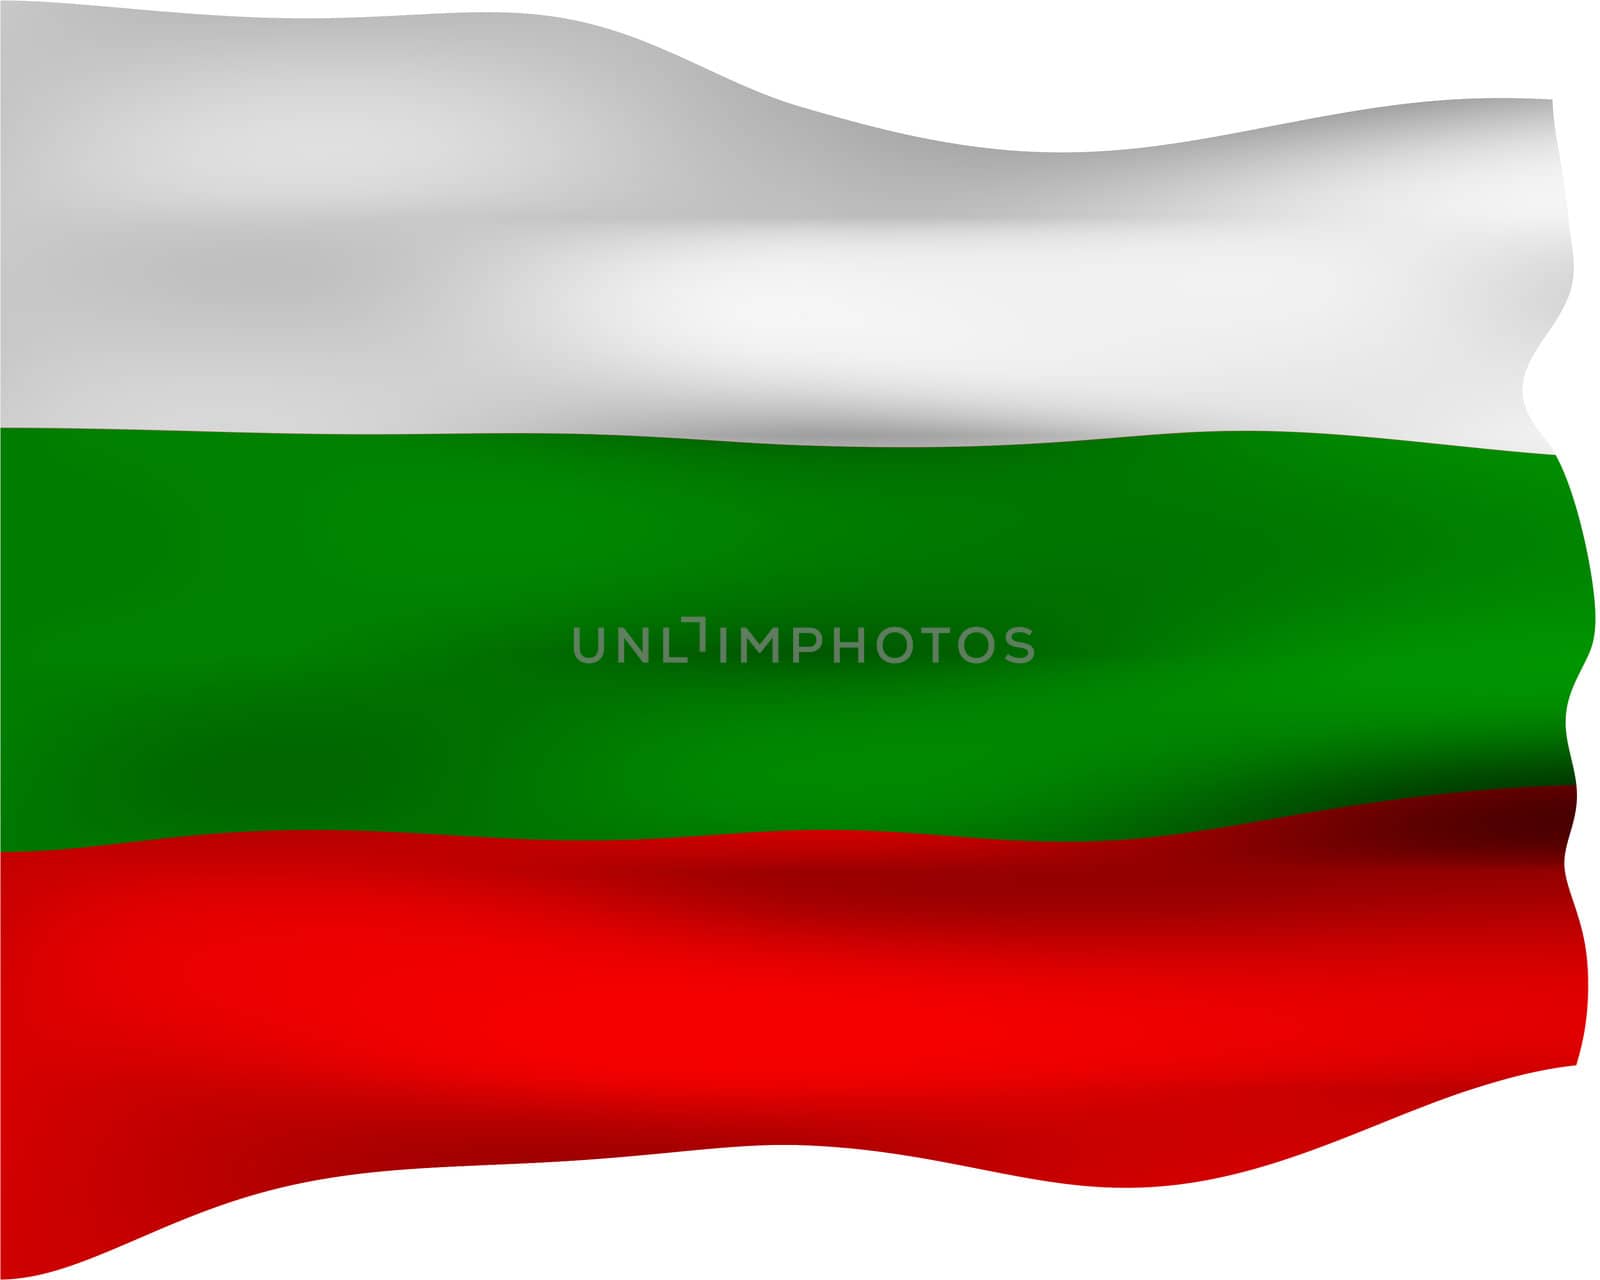 3d flag of Bulgaria isolated in white